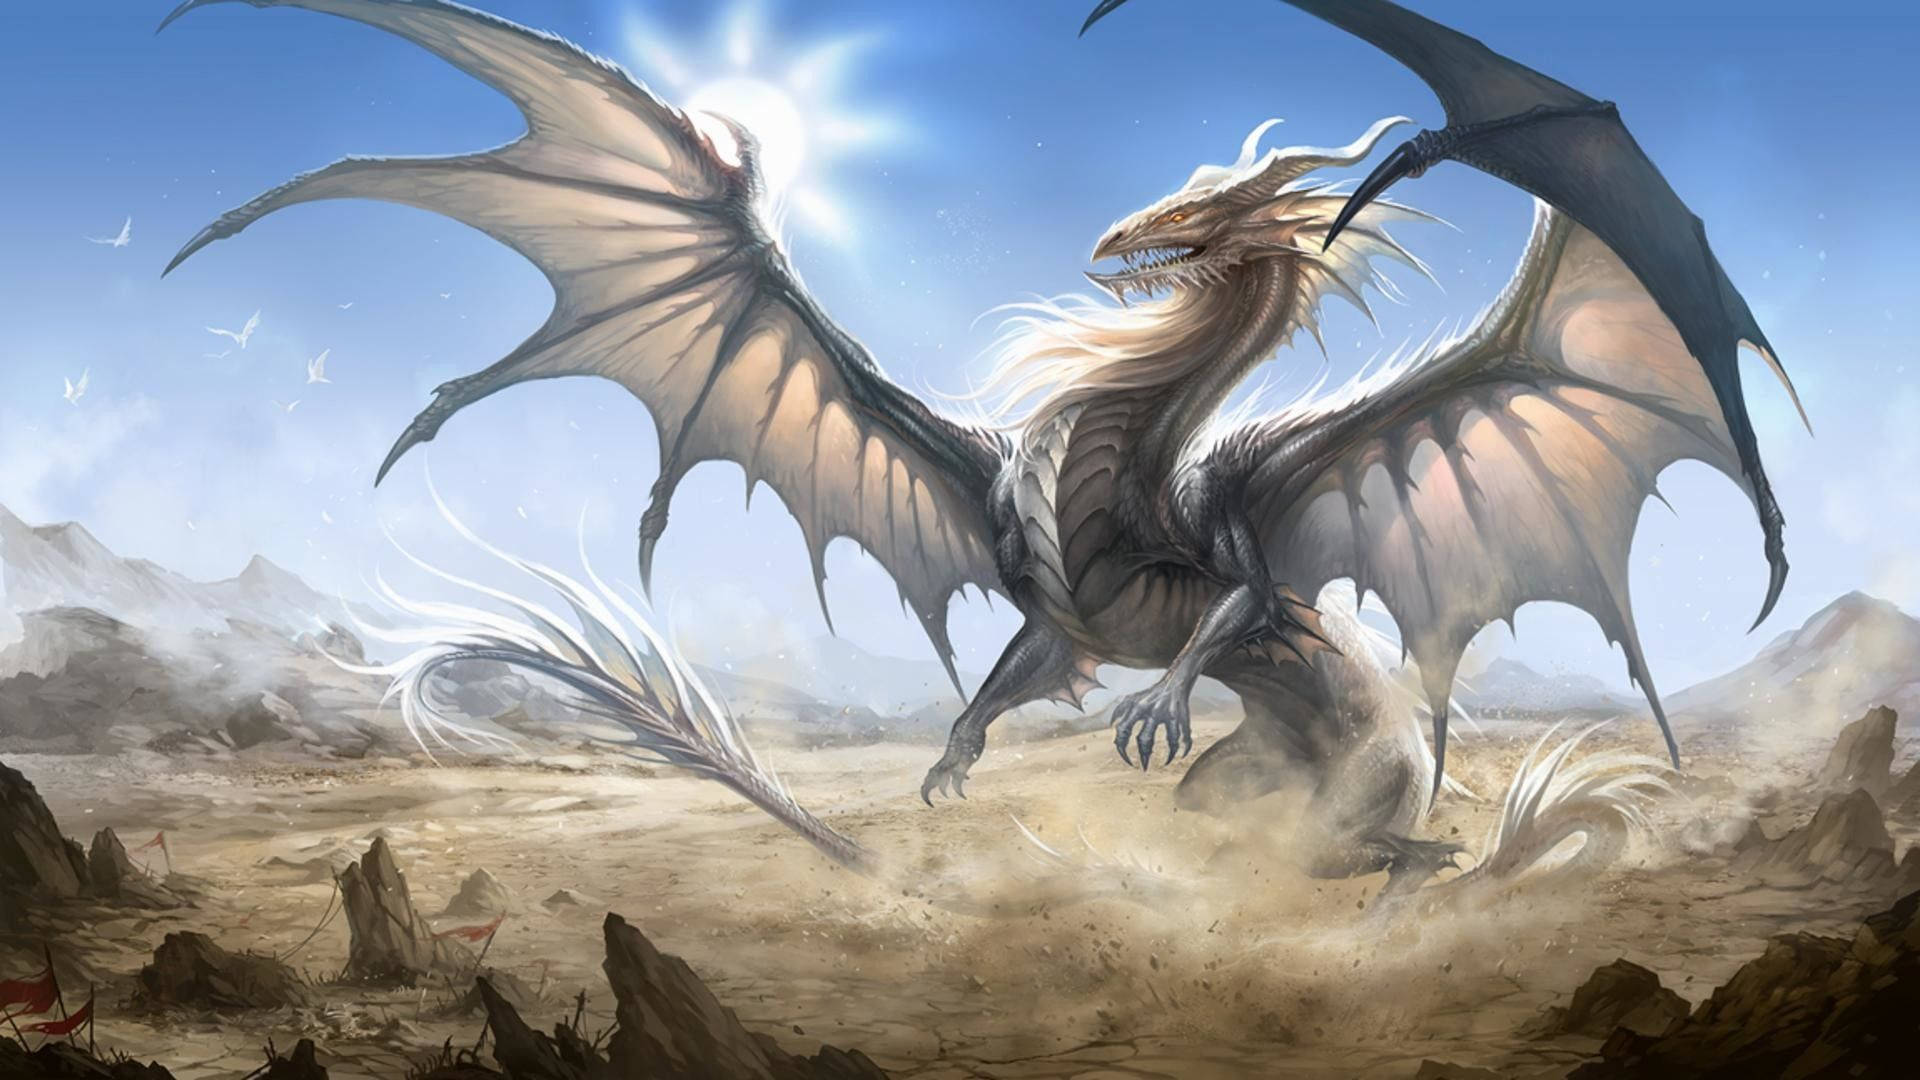 Get the Coolest Dragon with sharp razor wings Wallpaper